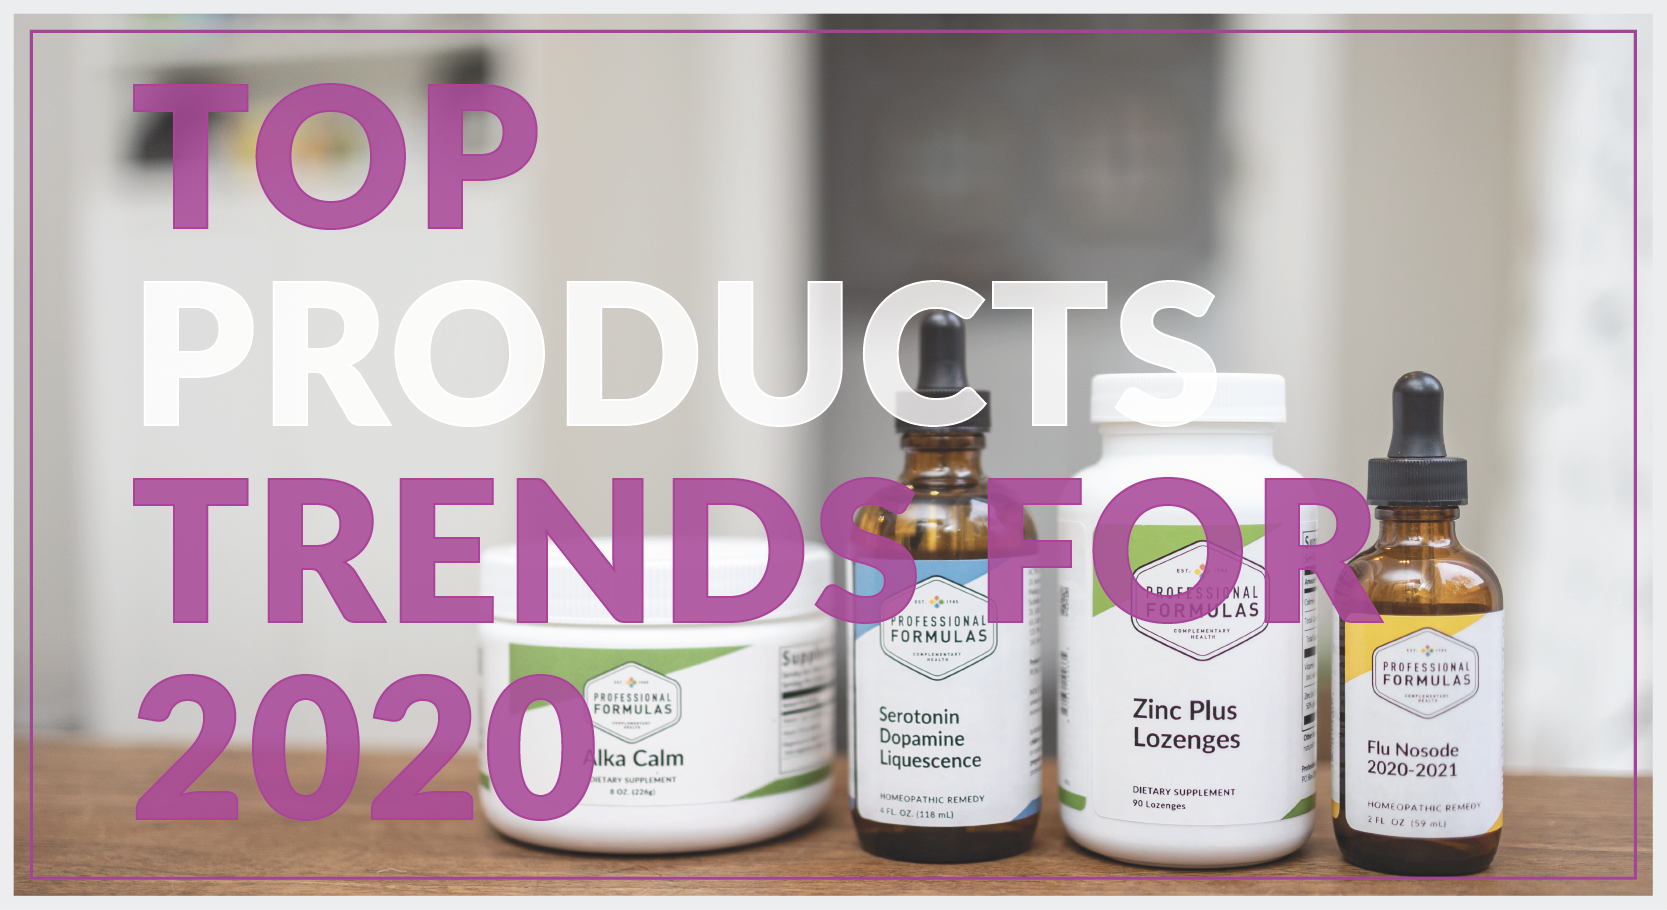 Professional Formulas - Top Products 2020